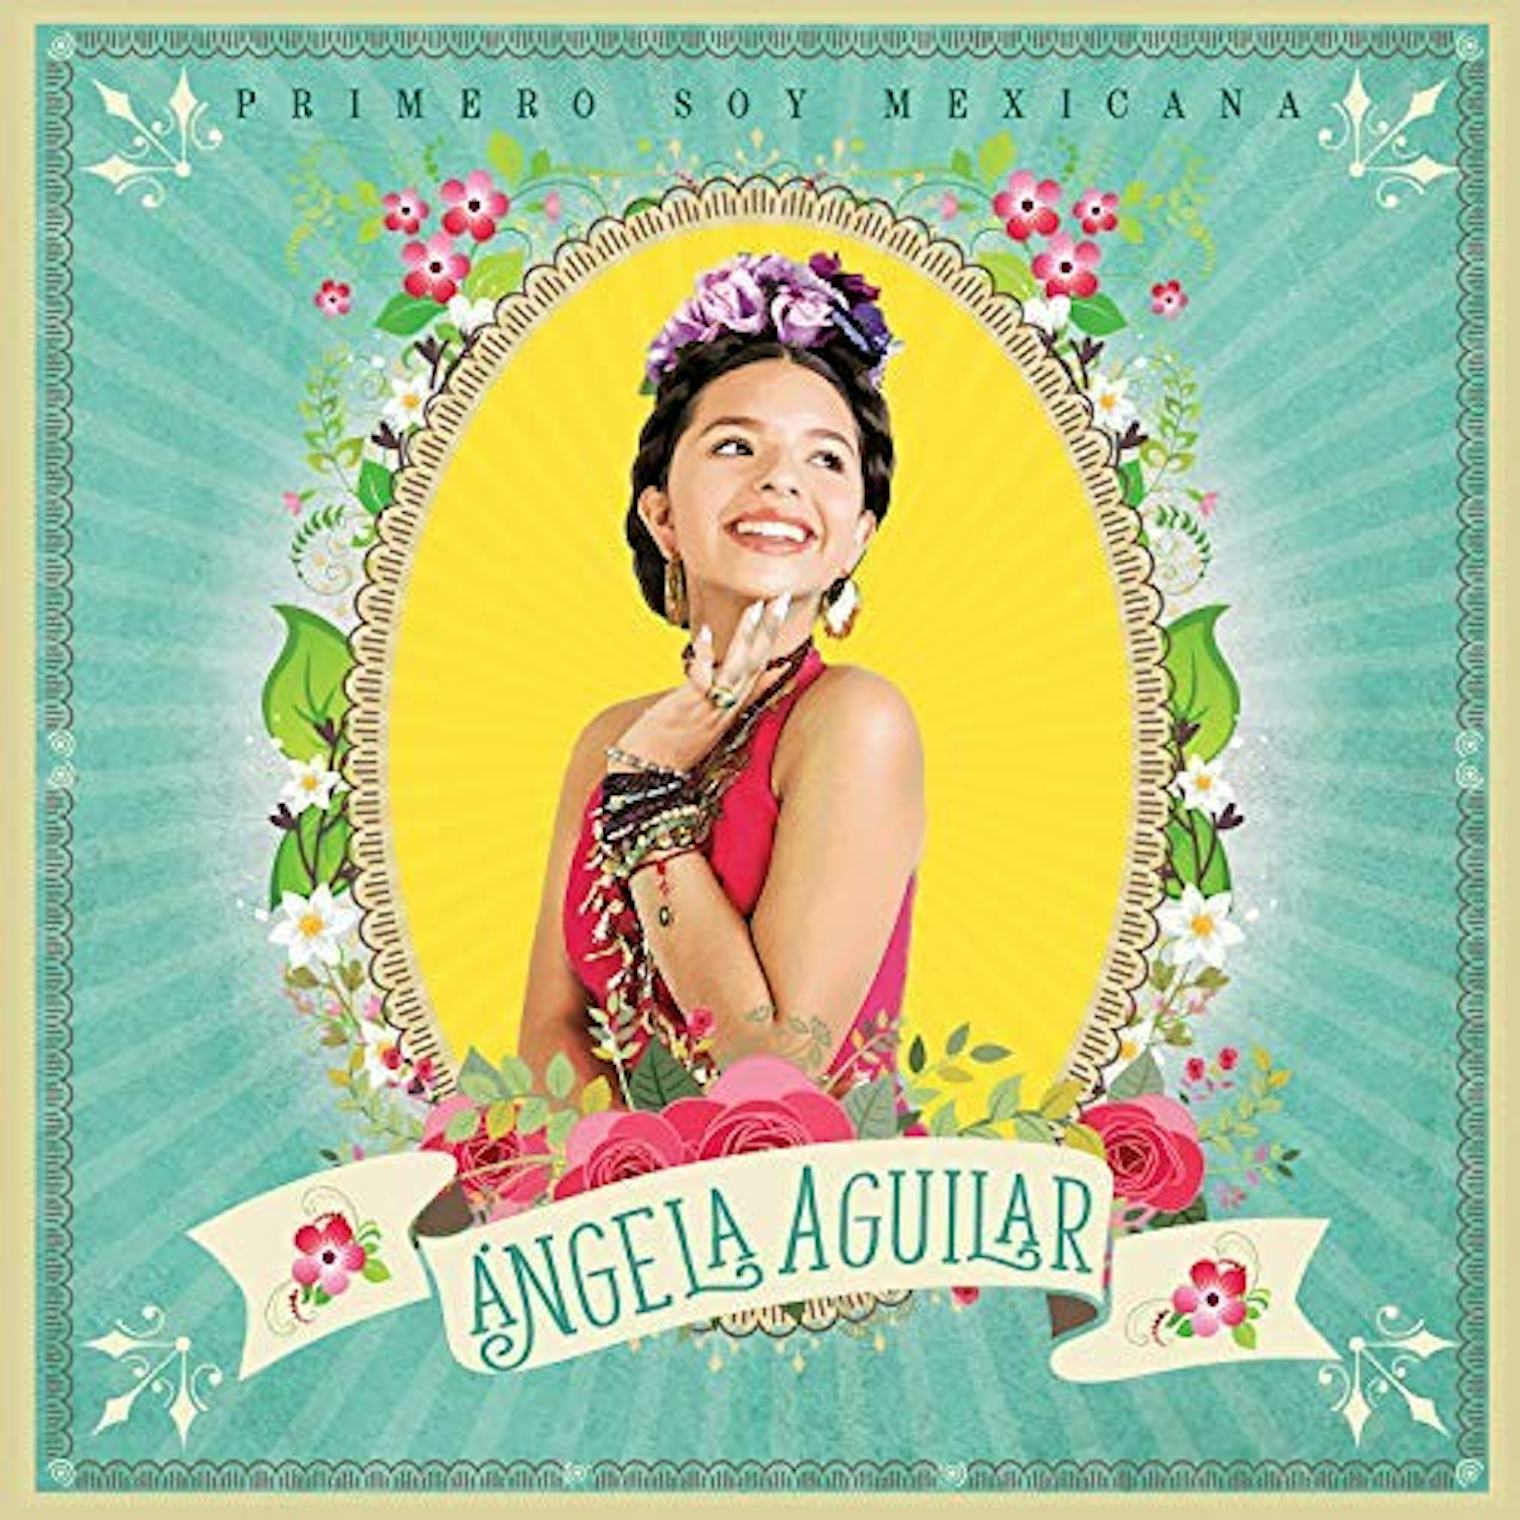 For Grammy Nominated Singer Ángela Aguilar Being Mexican American Is